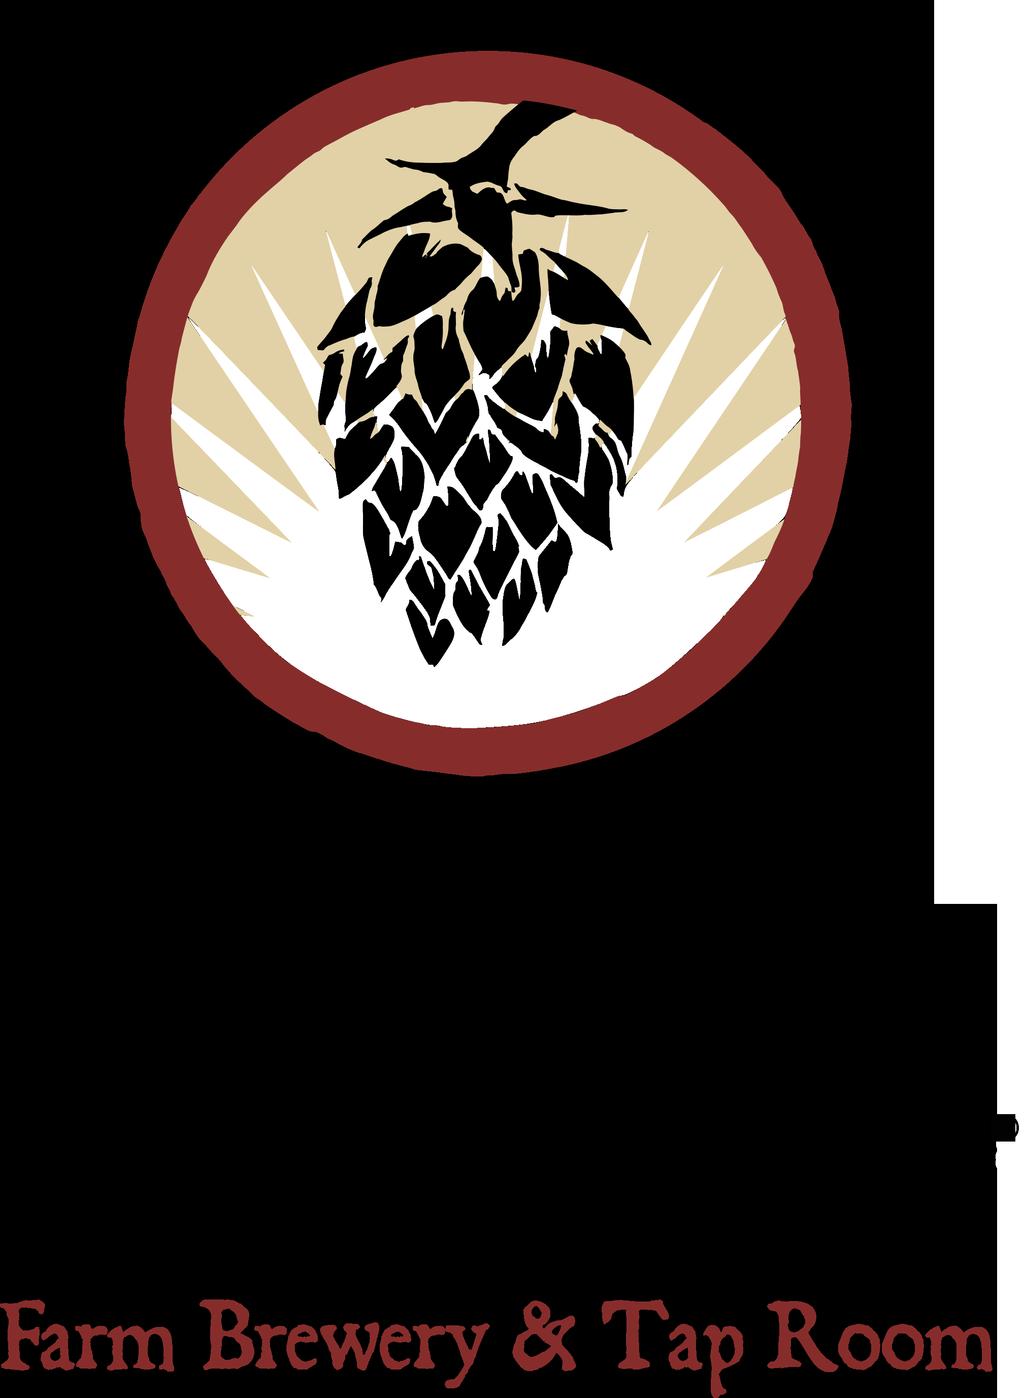 37 Milford St. Hamilton, NY 13346 315-824-1560 HEAD BREWER JOB DESCRIPTION: Title: Head Brewer As an employee of Good Nature Brewing, Inc. you will have many tasks on any given day.